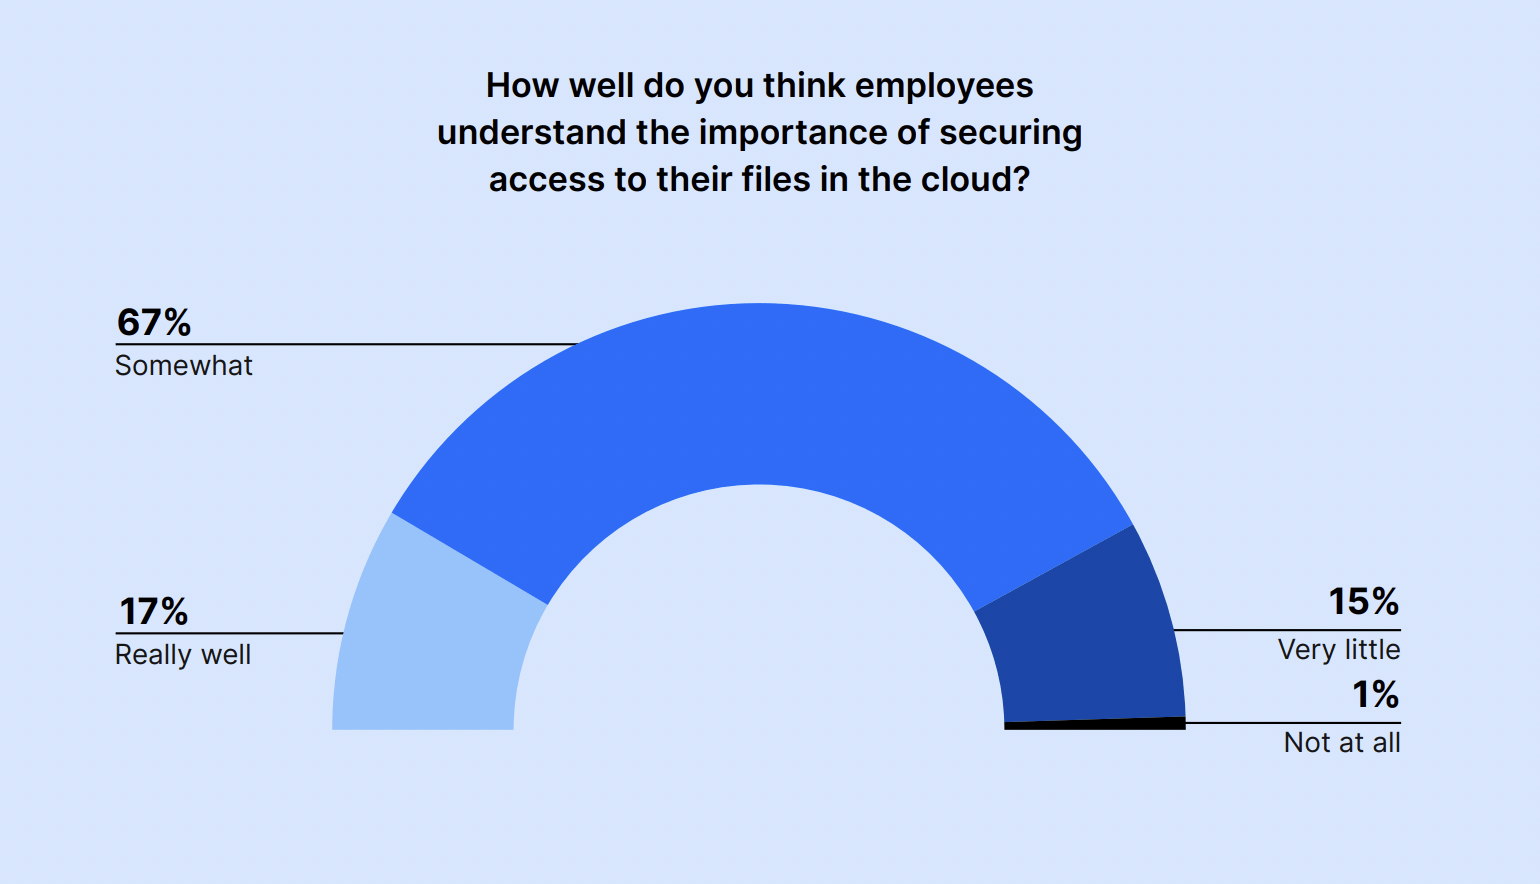 How well do you think employees understand the importance of securing access to their files in the cloud?